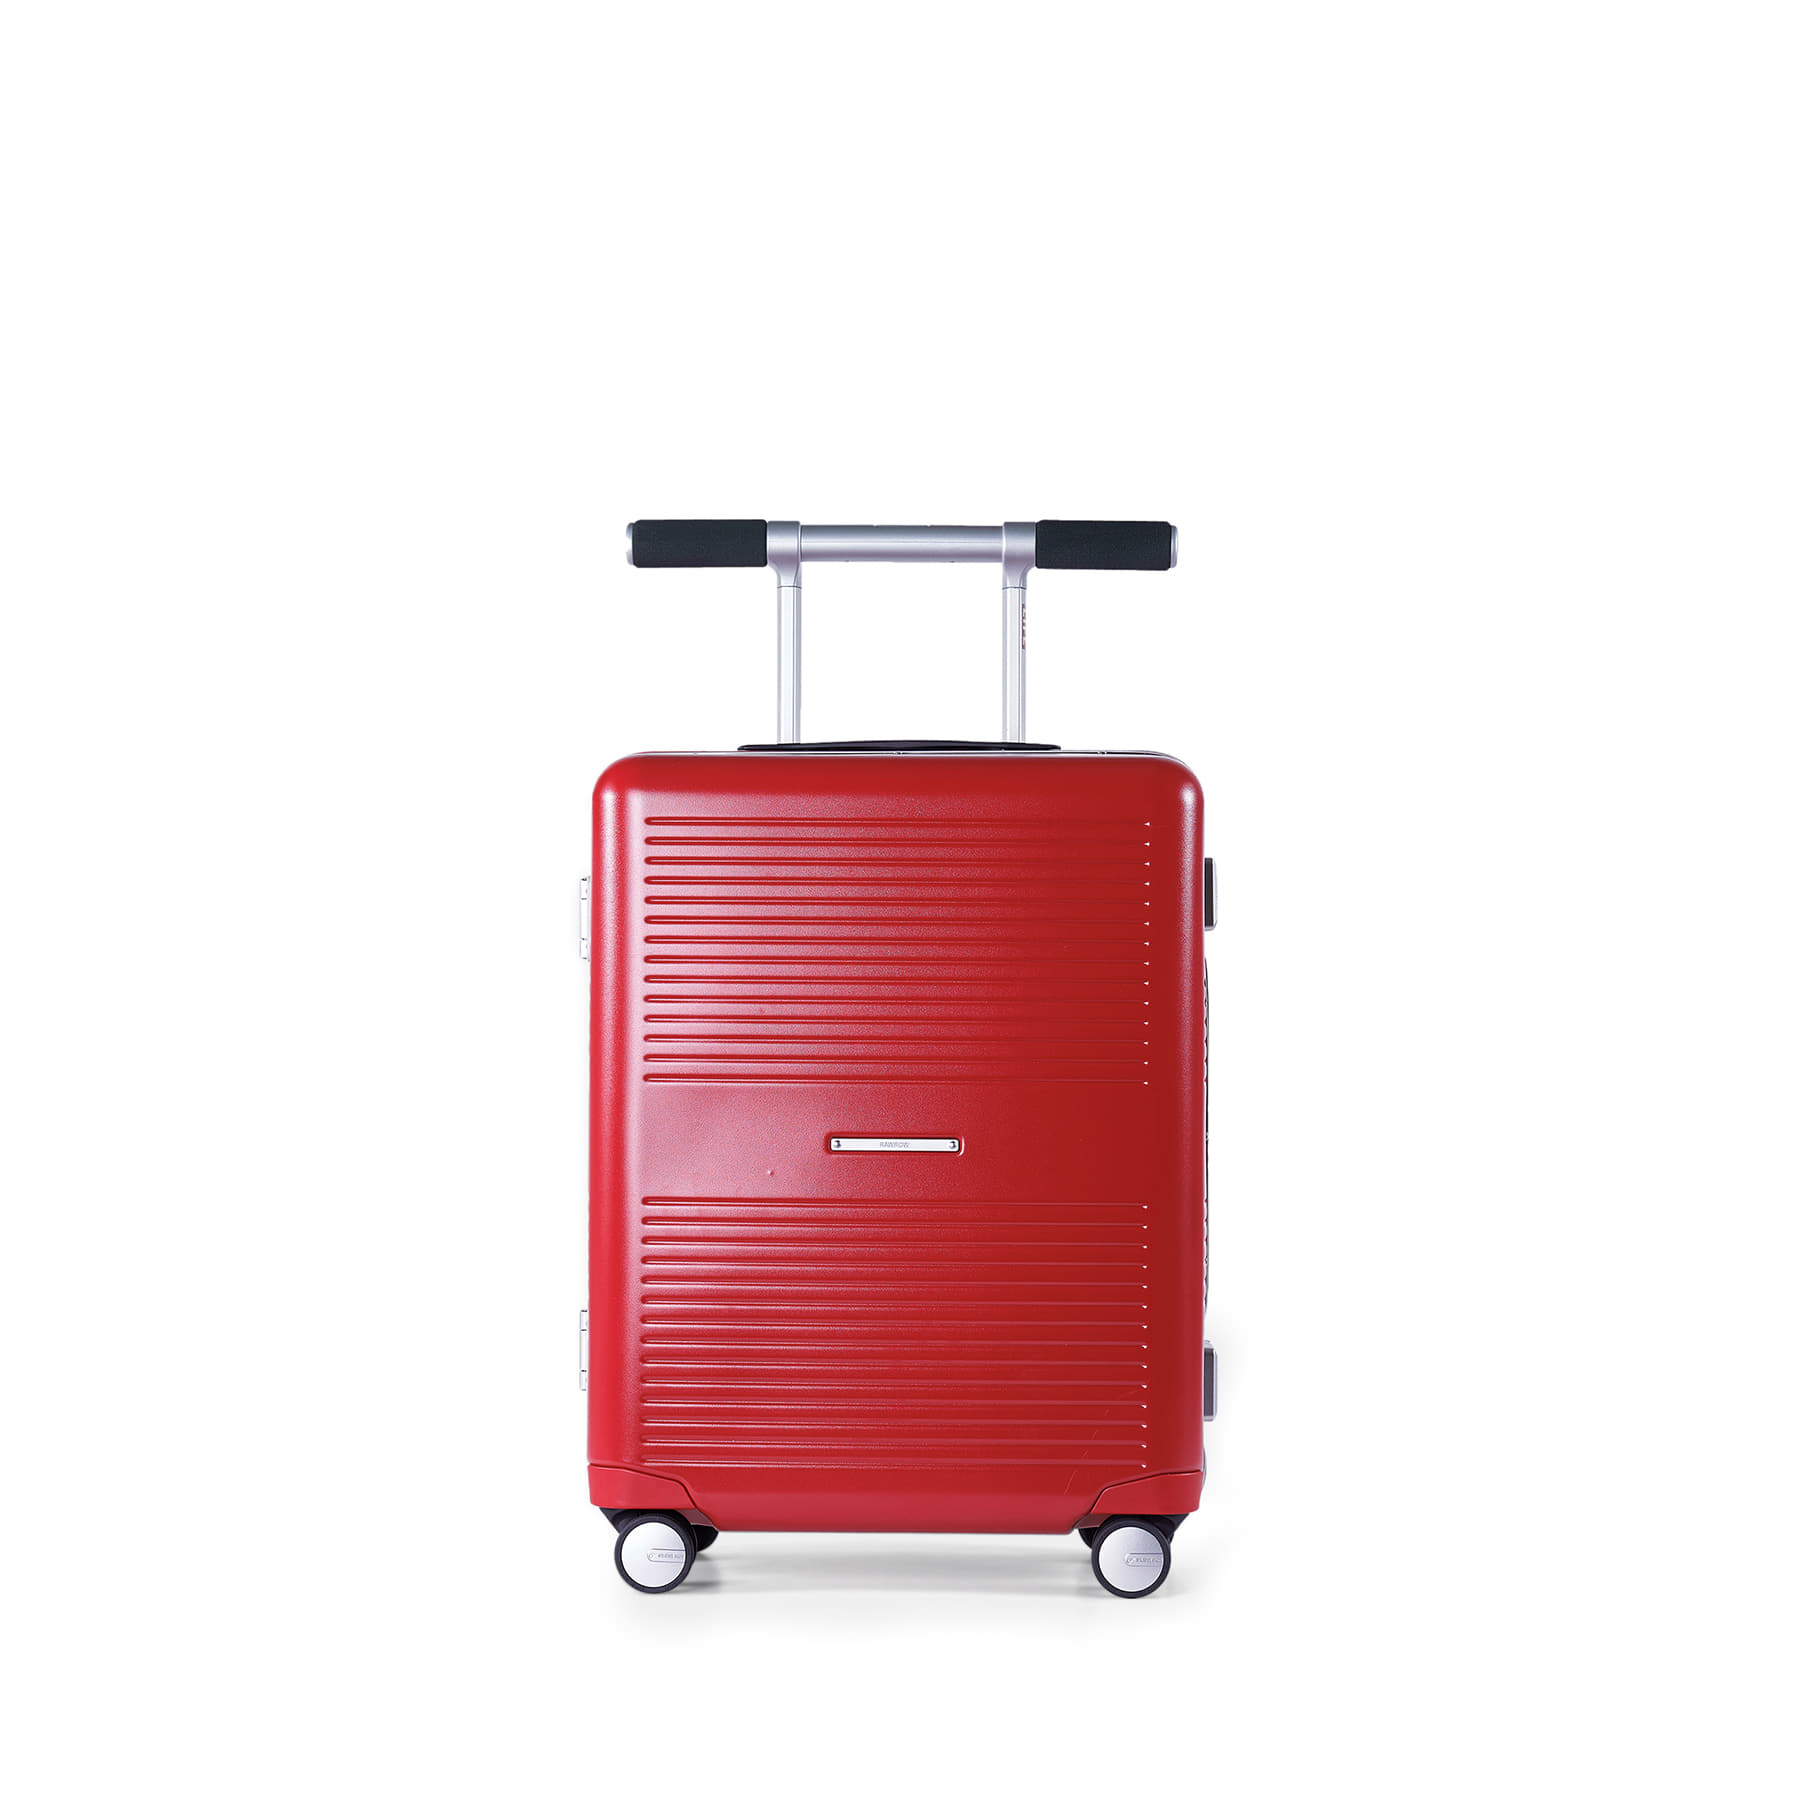 R TRUNK FRAME 37L LIFE RED